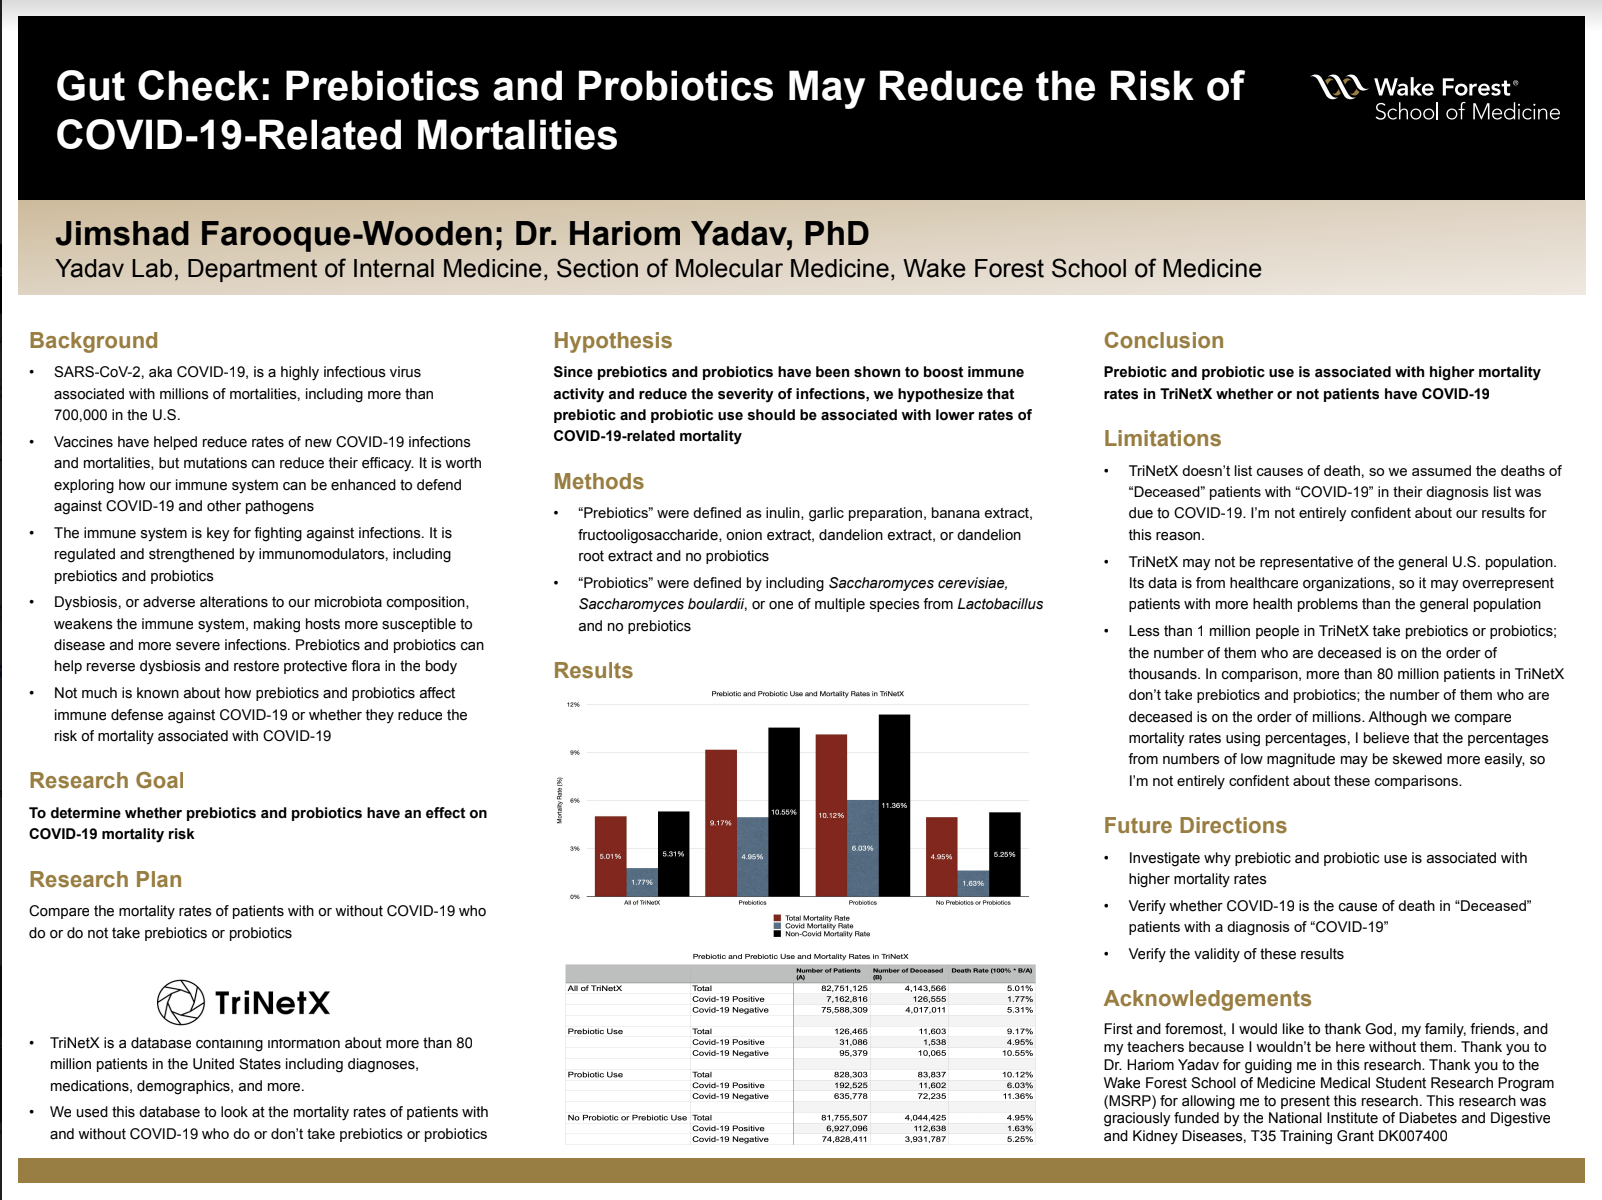 Showcase Image for Gut Check: Prebiotics and Probiotics May Reduce the Risk of Covid-19-Related Mortalities